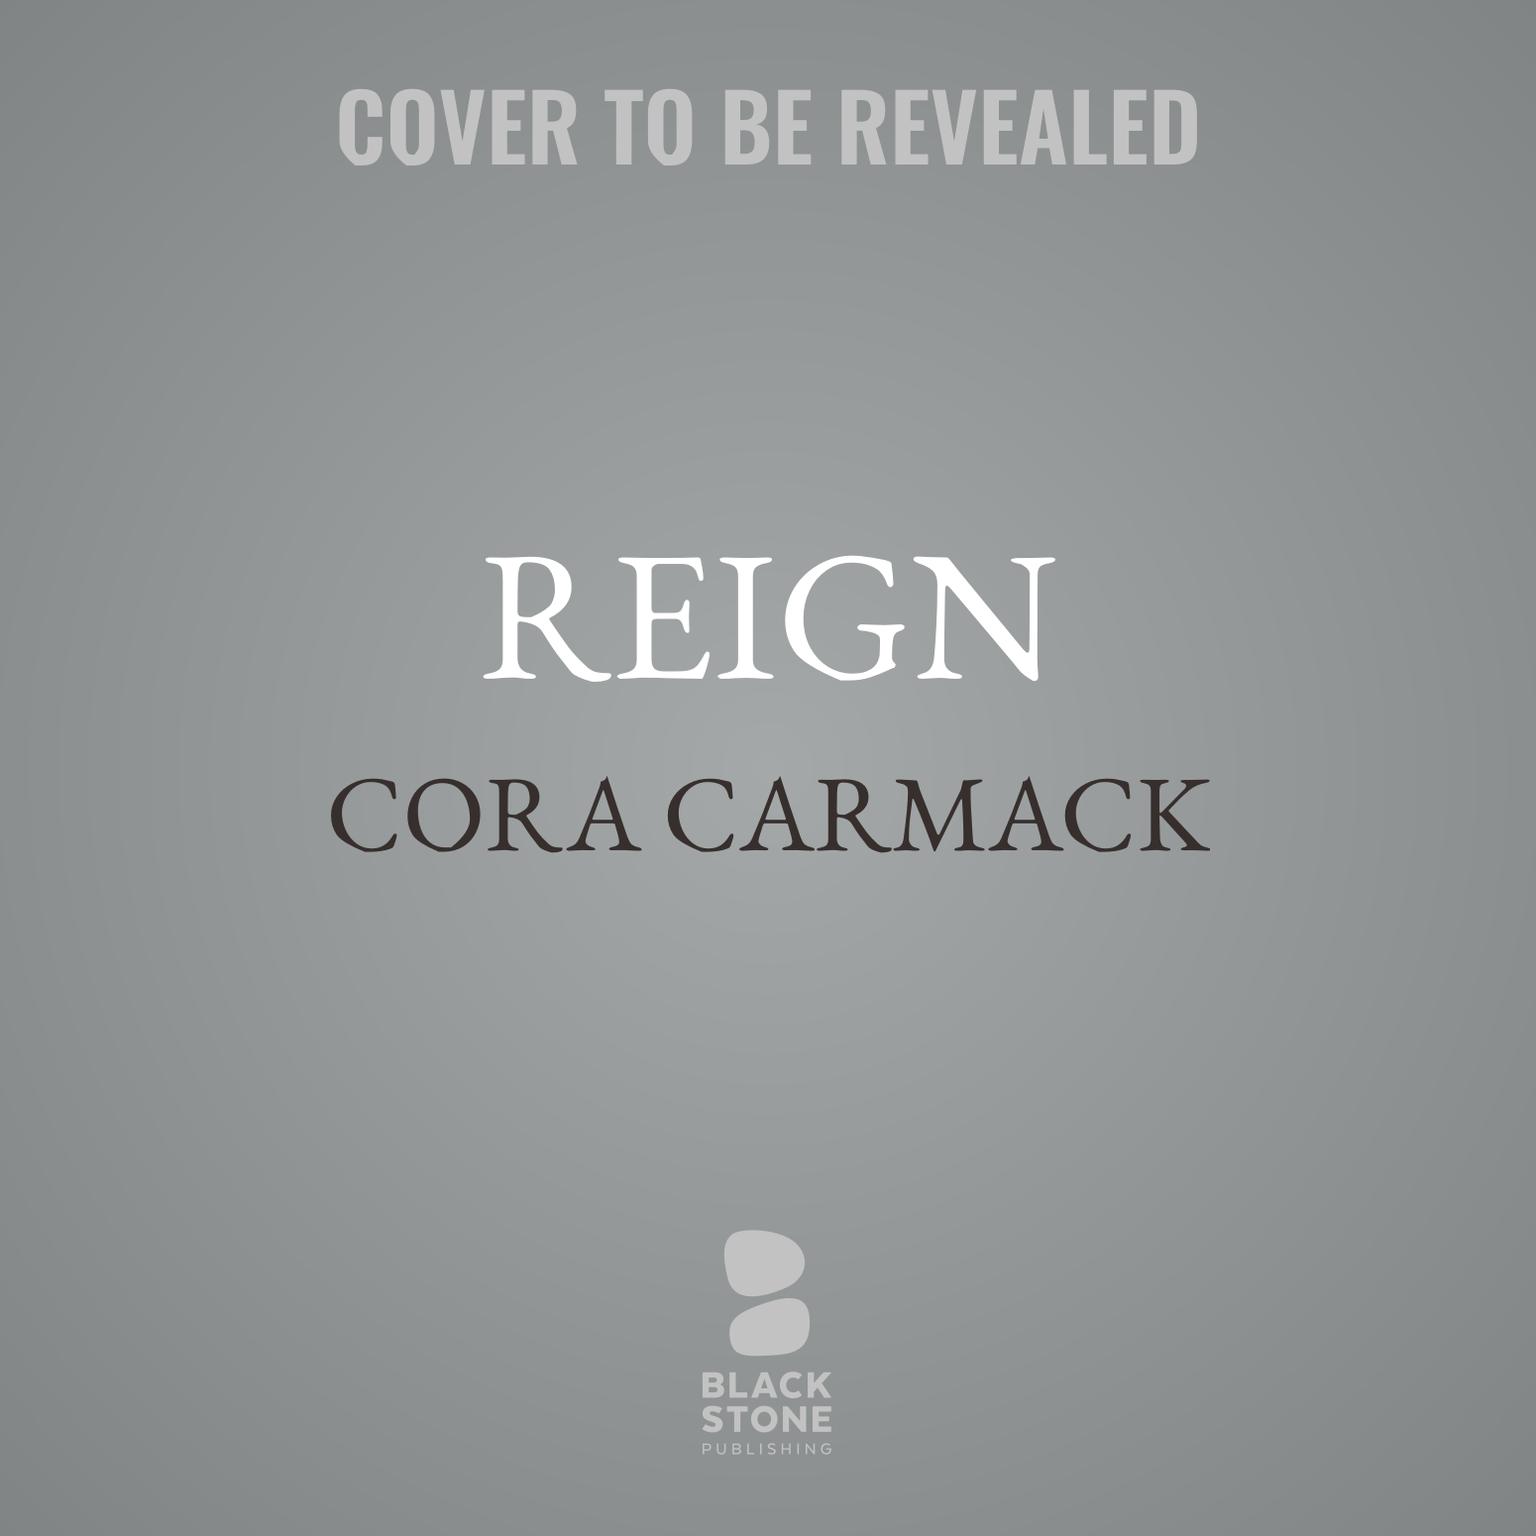 Reign Audiobook, by Cora Carmack